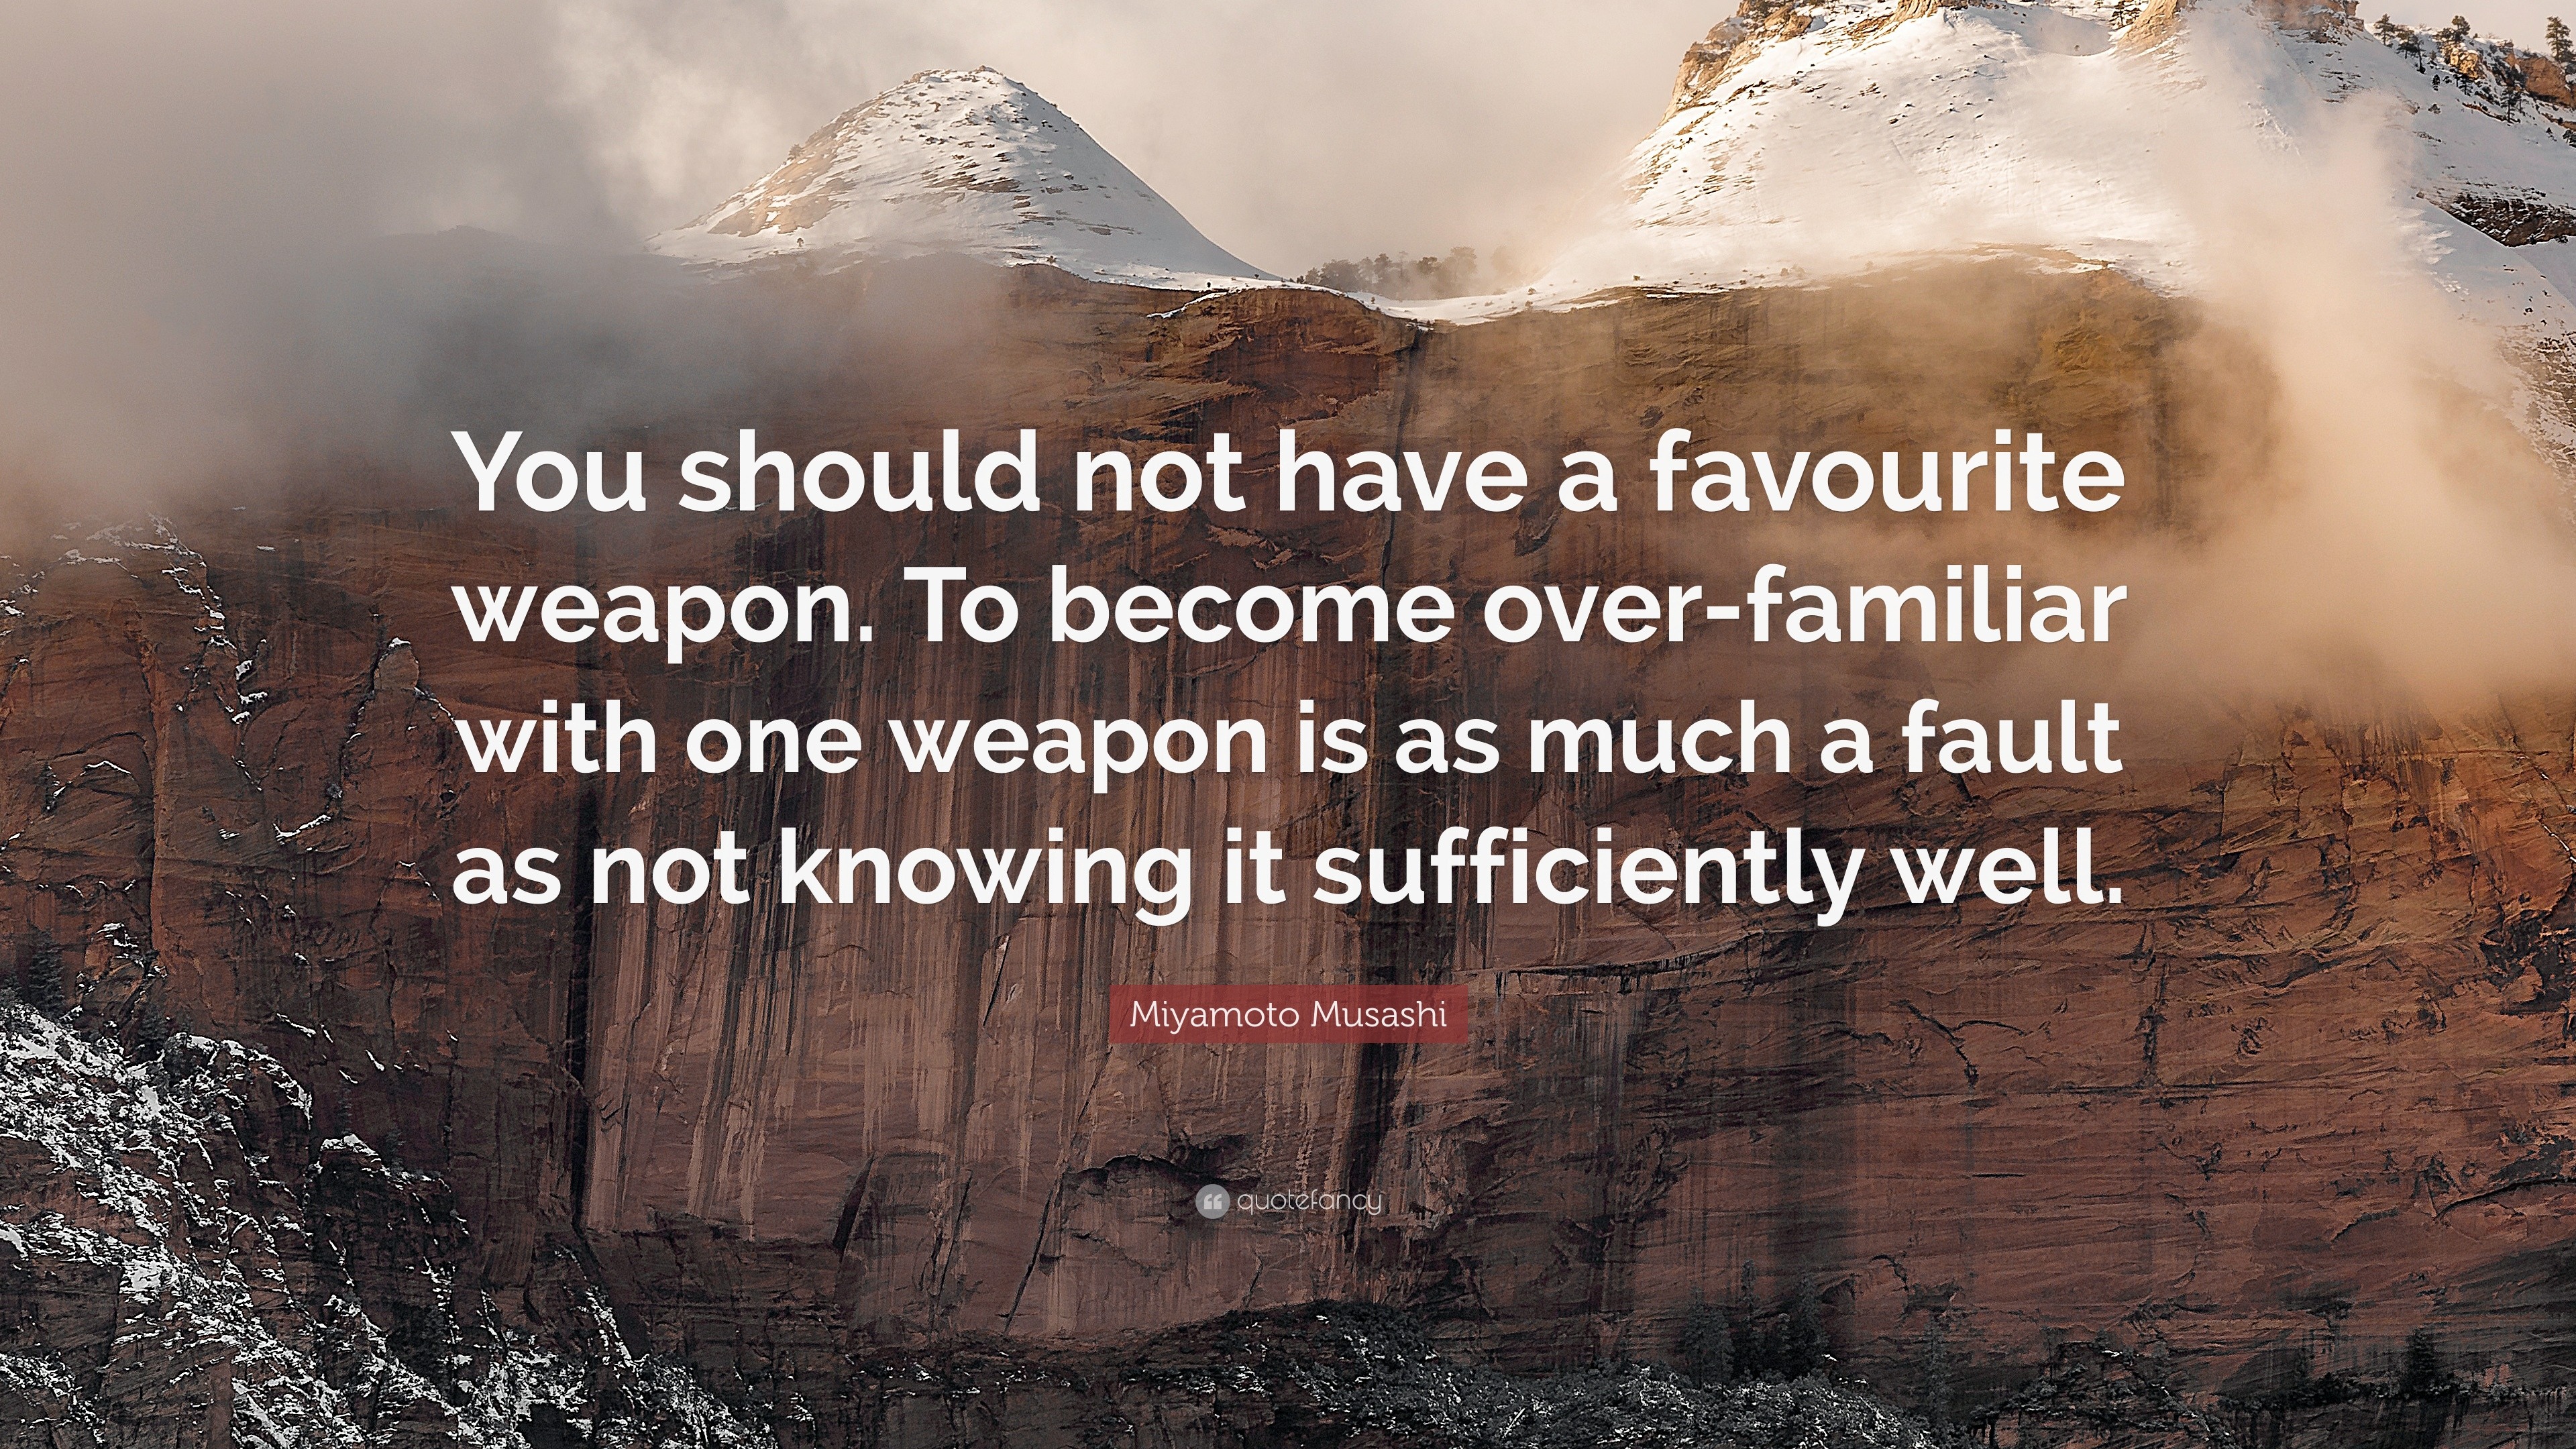 Miyamoto Musashi Quote: “You should not have a favourite weapon. To ...